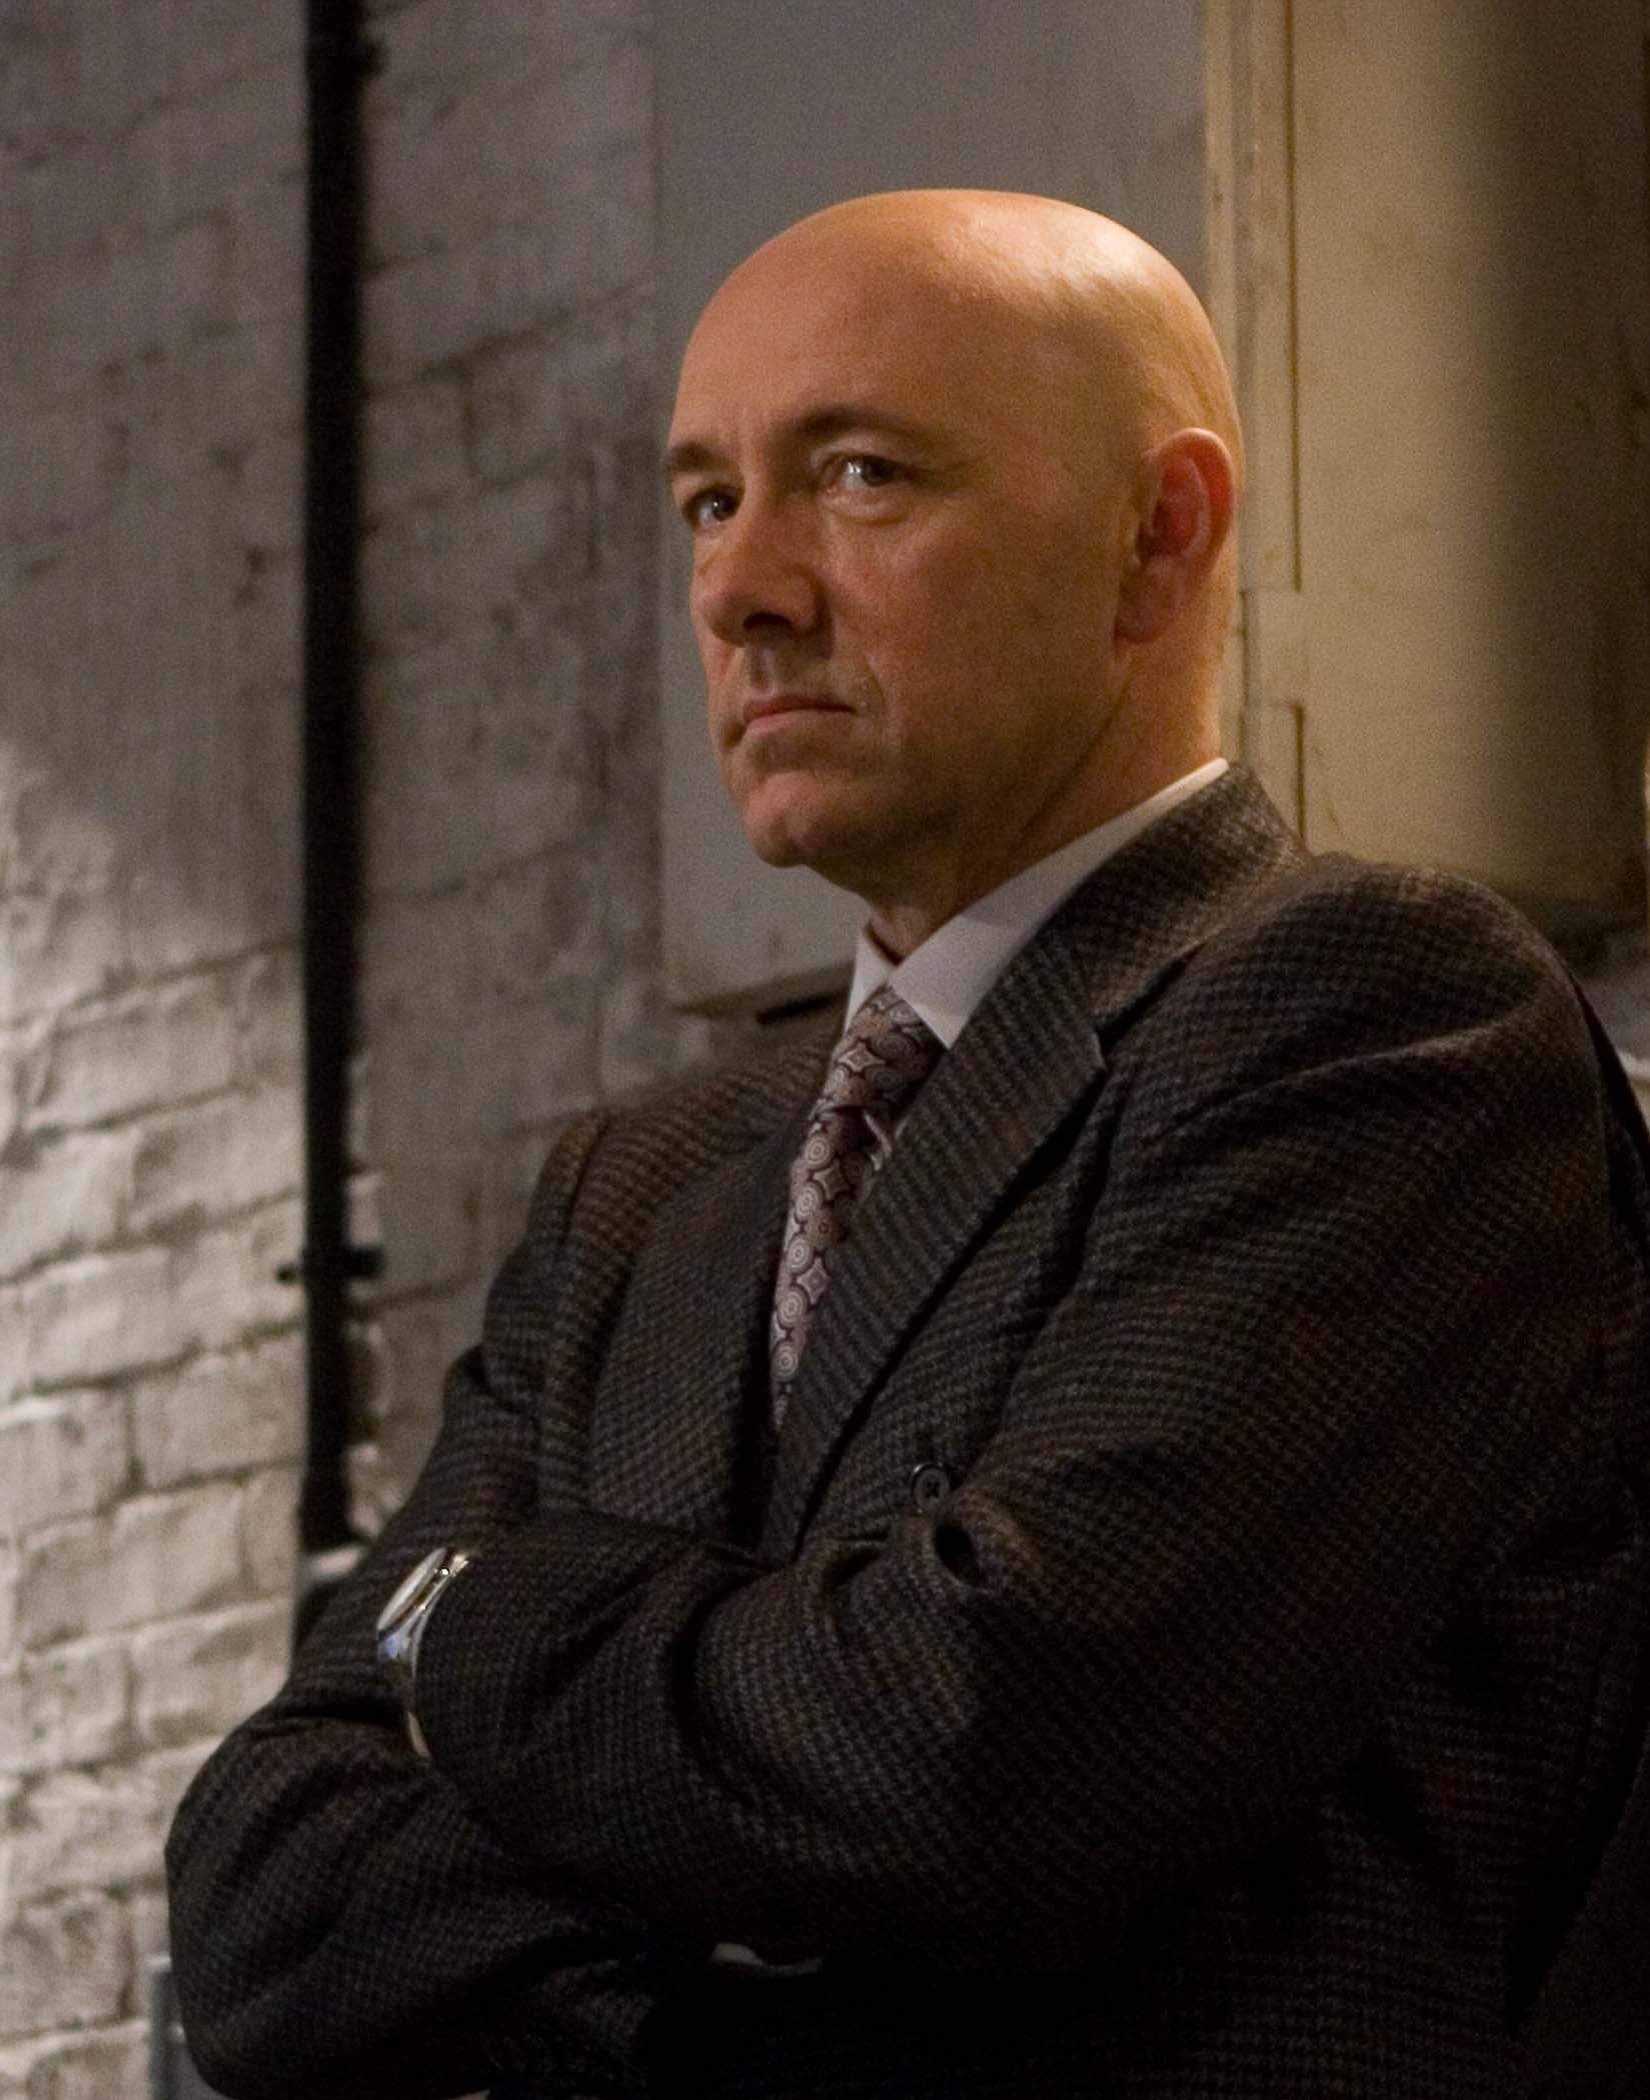 KEVIN SPACEY as Lex Luthor in a scene from  Warner Bros Pictures' Superman Returns (2006)